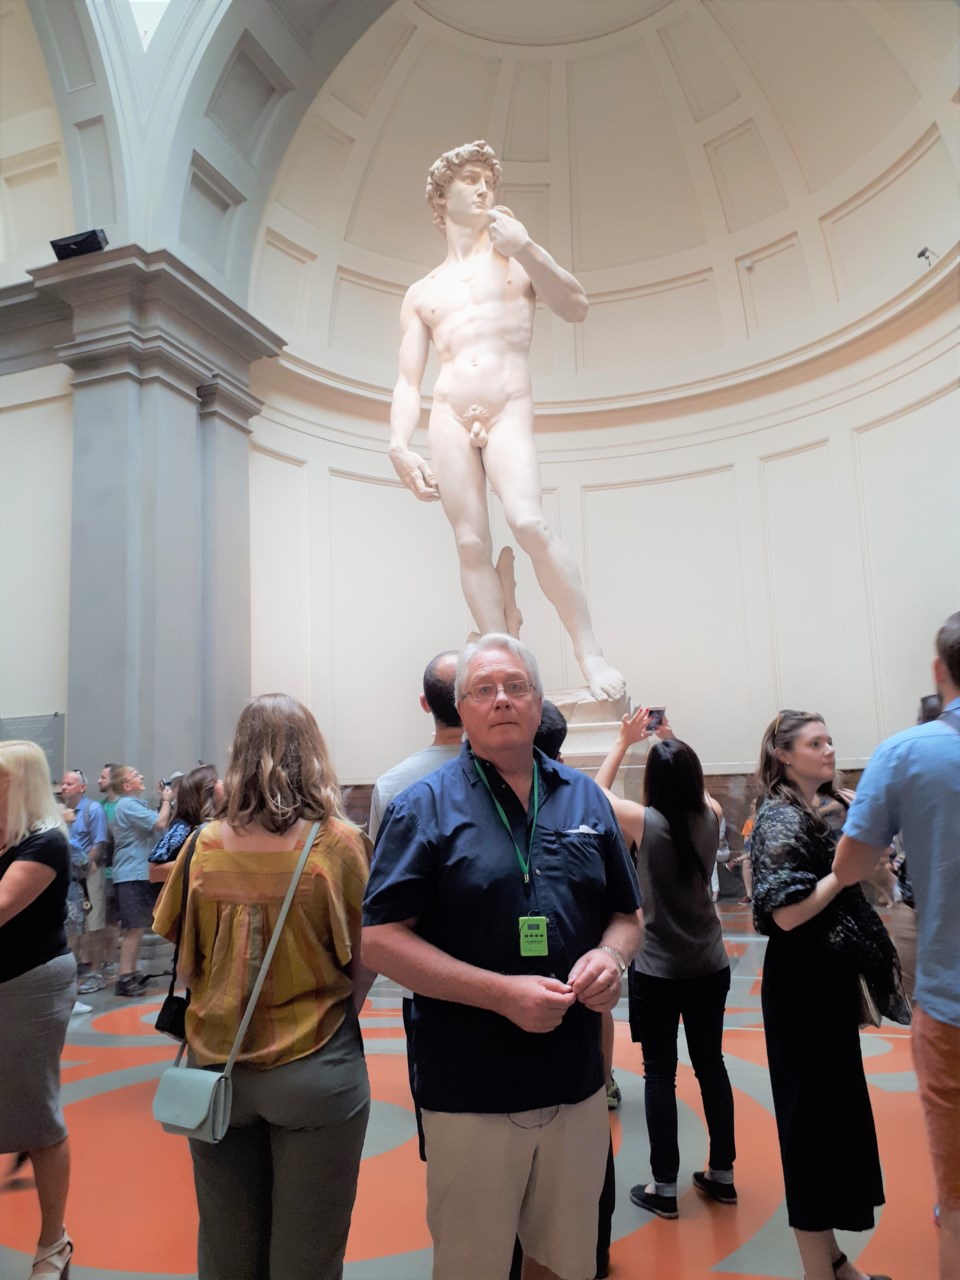 David, the Renaissance, and the importance of context